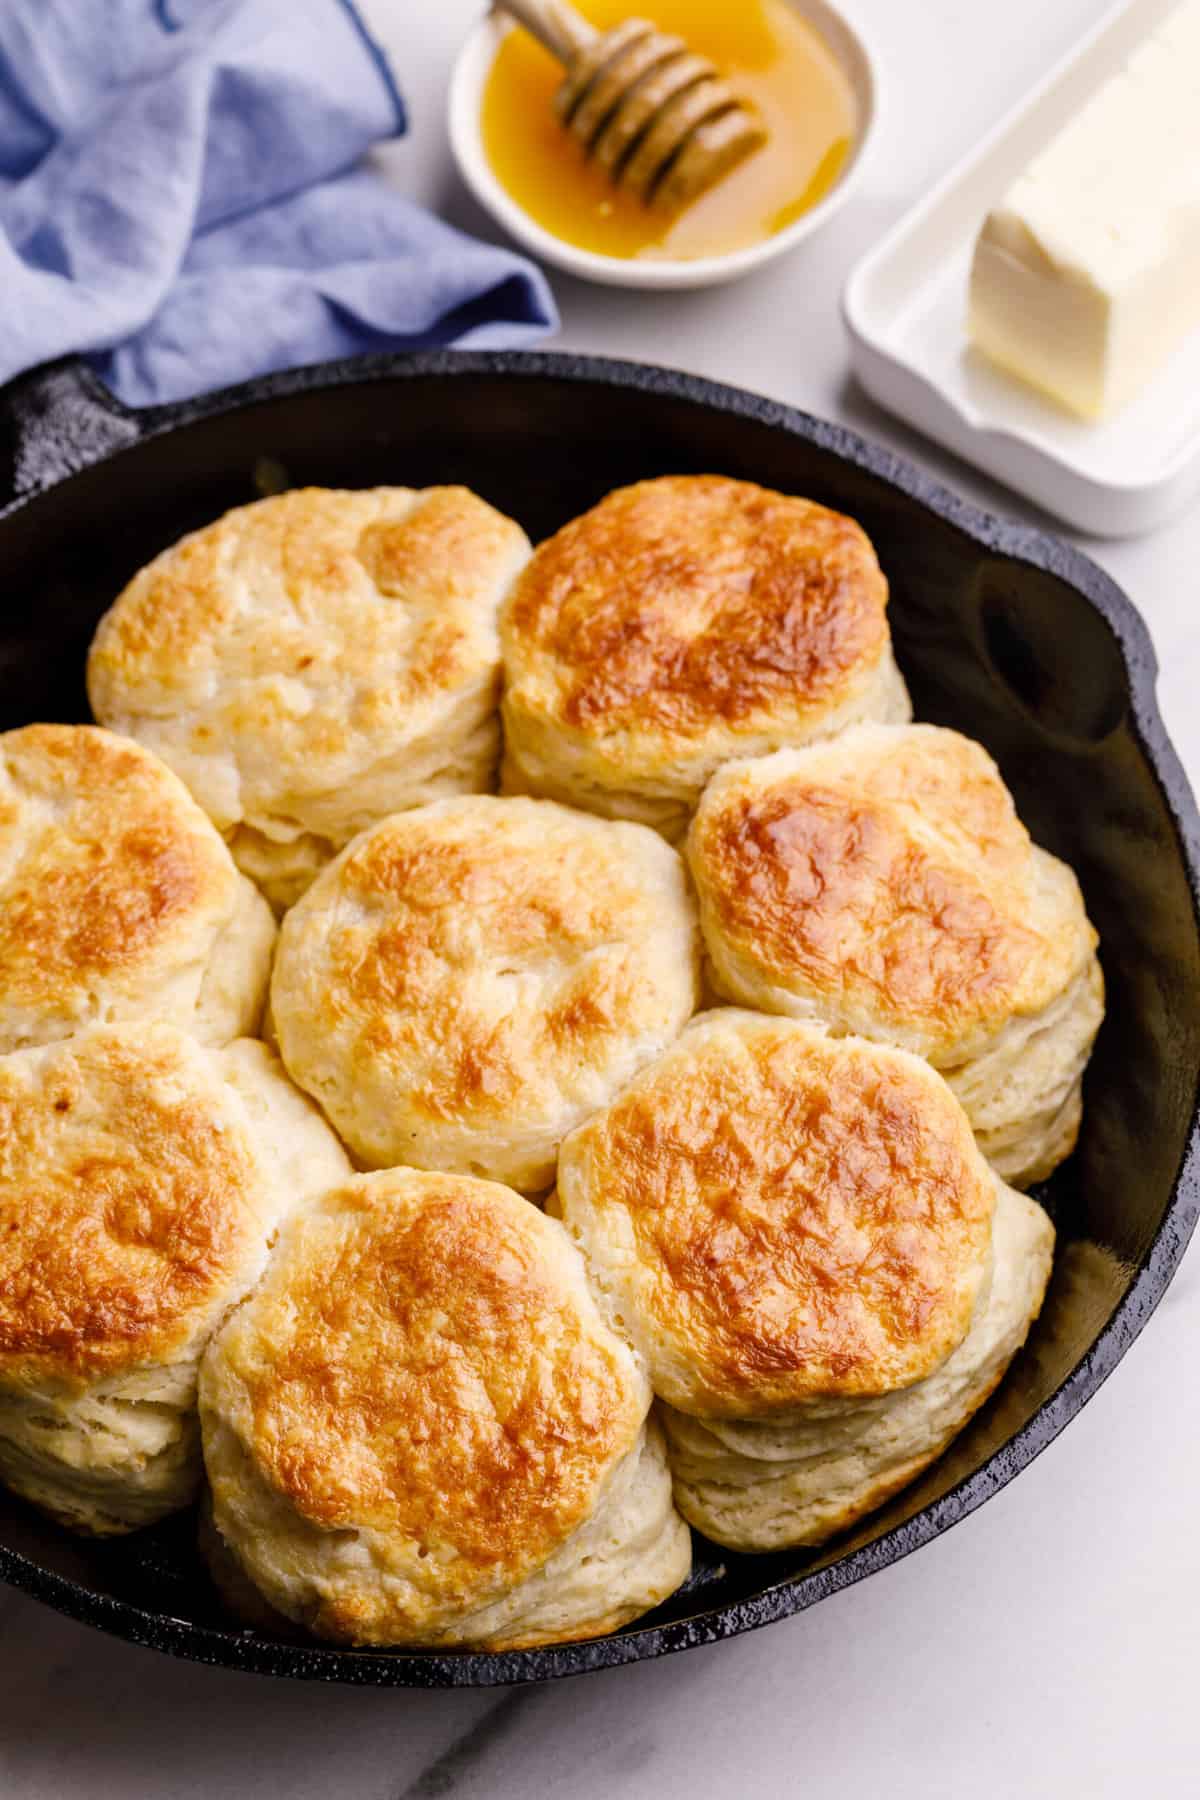 Baked buttermilk biscuits are shown sitting in a cast iron skillet.